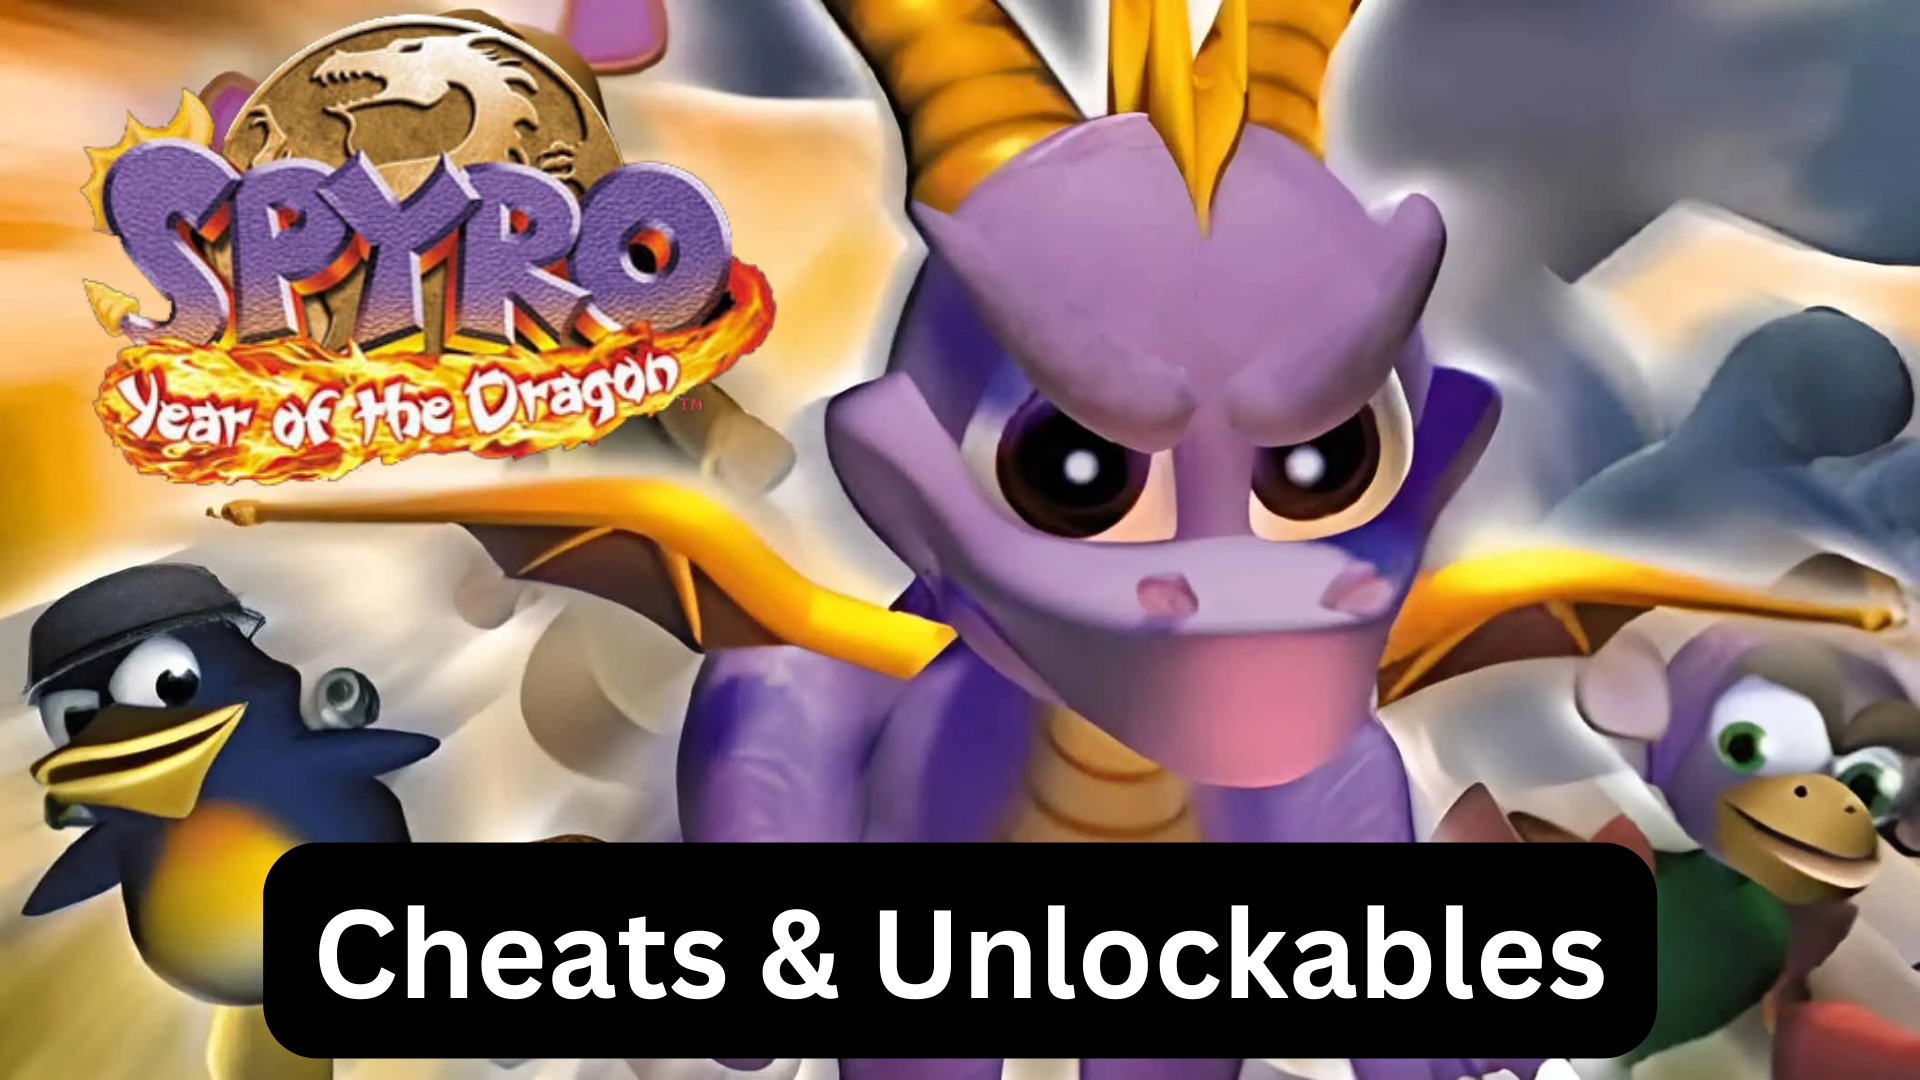 spyro: year of the dragon cheats and unlockables